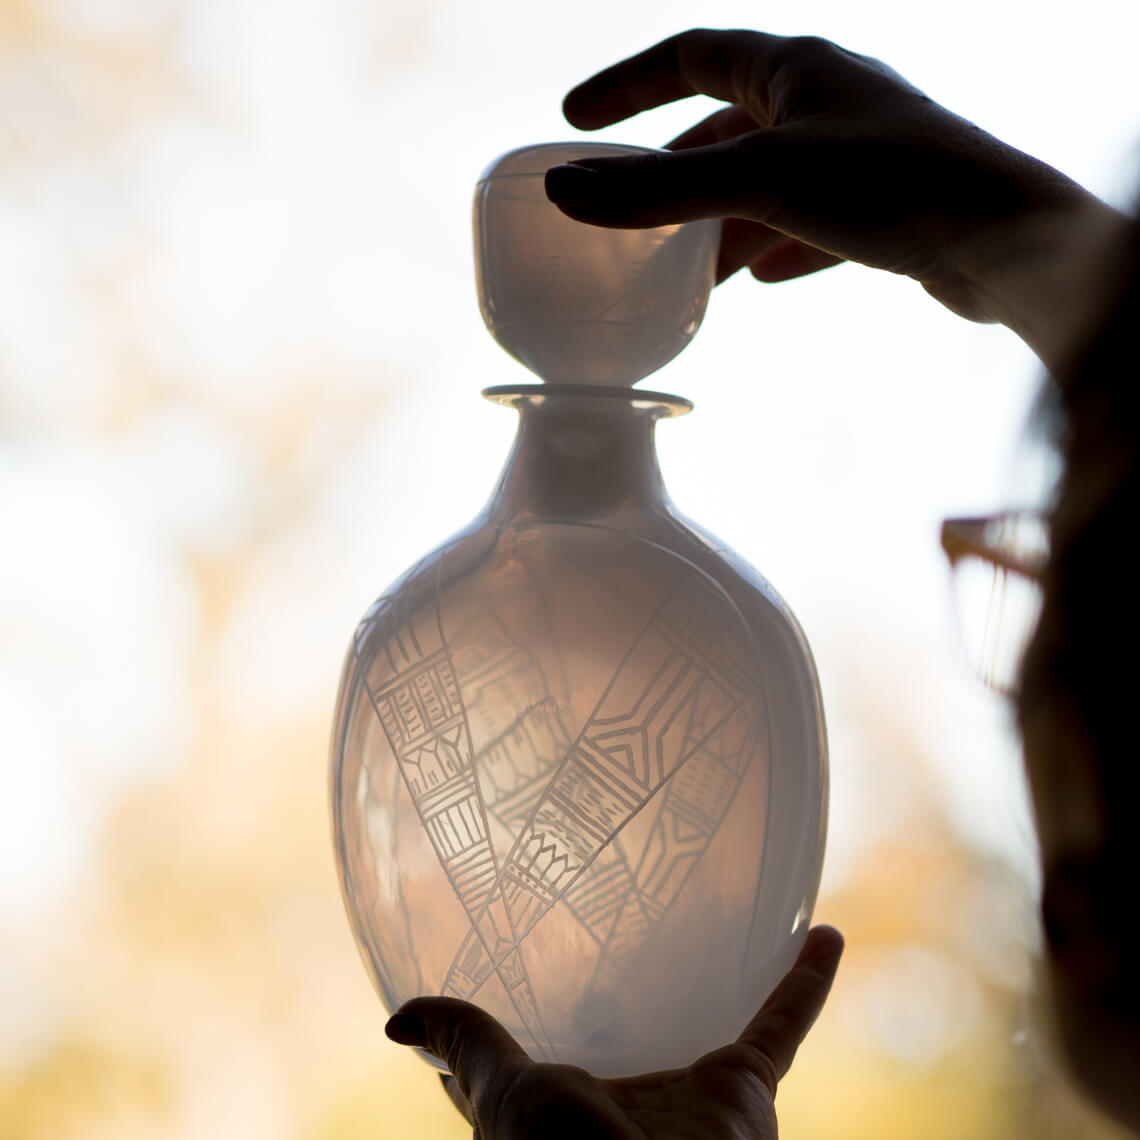 Translucent white decanter being held up to the light. Geometric patterns are engraved on its surface